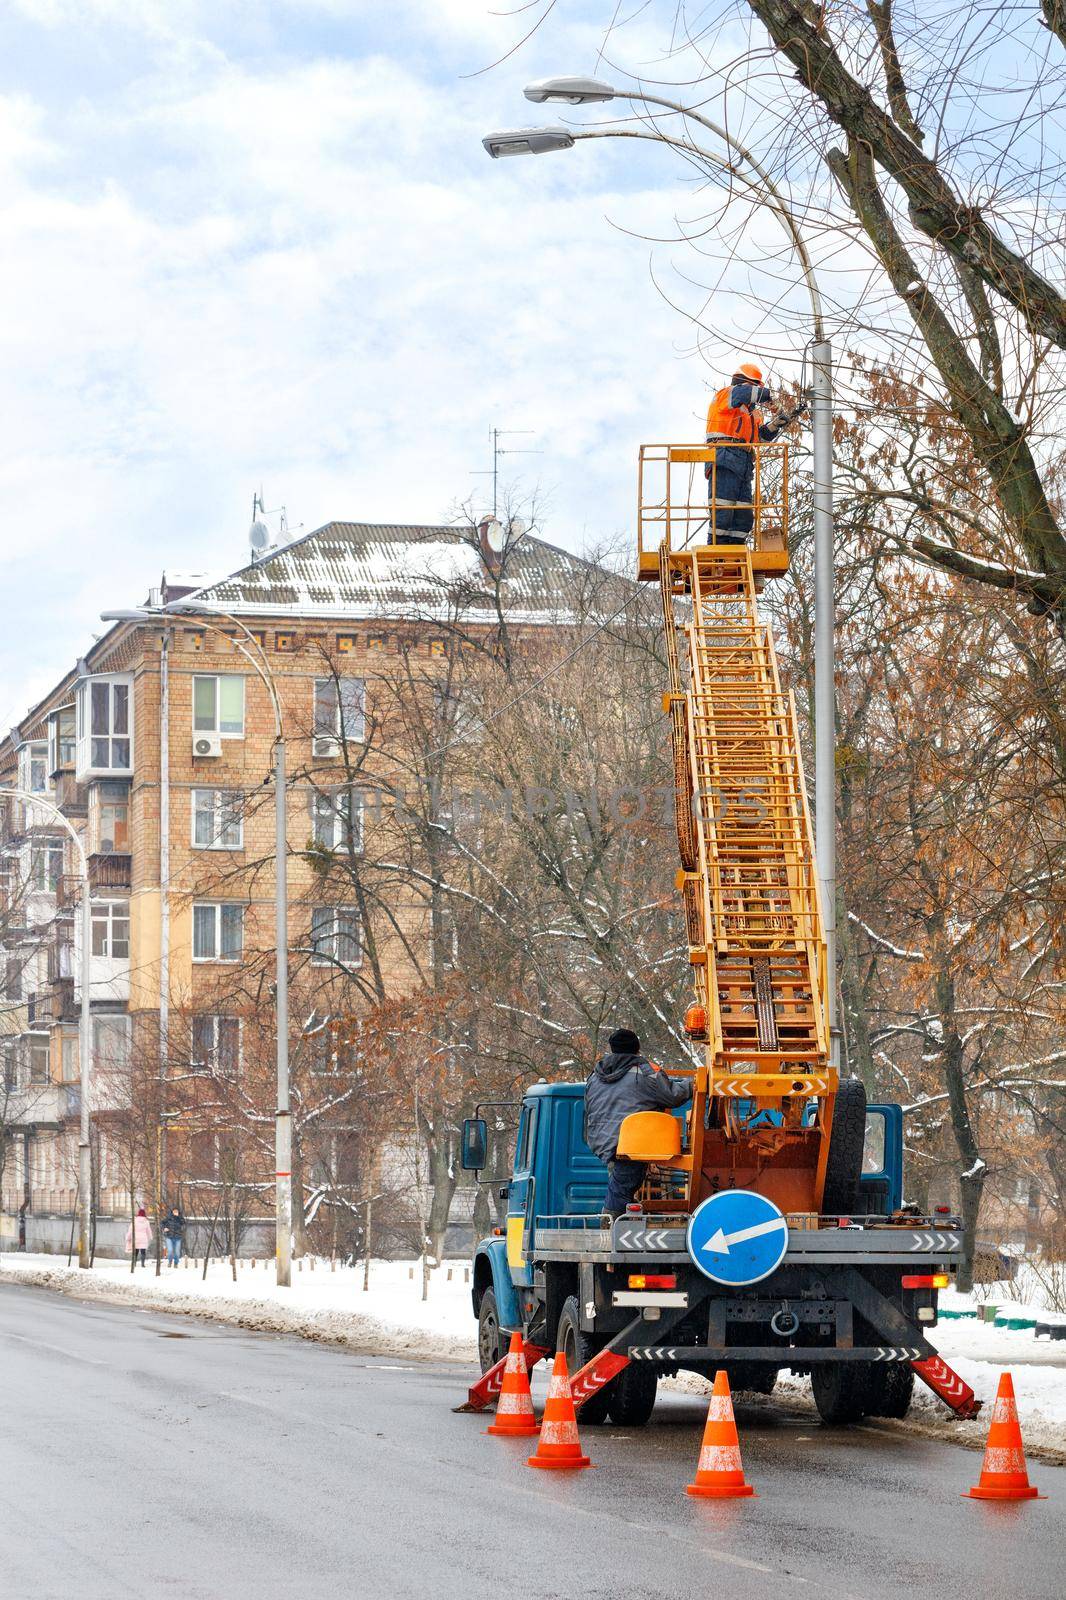 Road service workers in a truck with a telescopic ladder check the operation of street lighting in the winter. Copy space, vertical image.